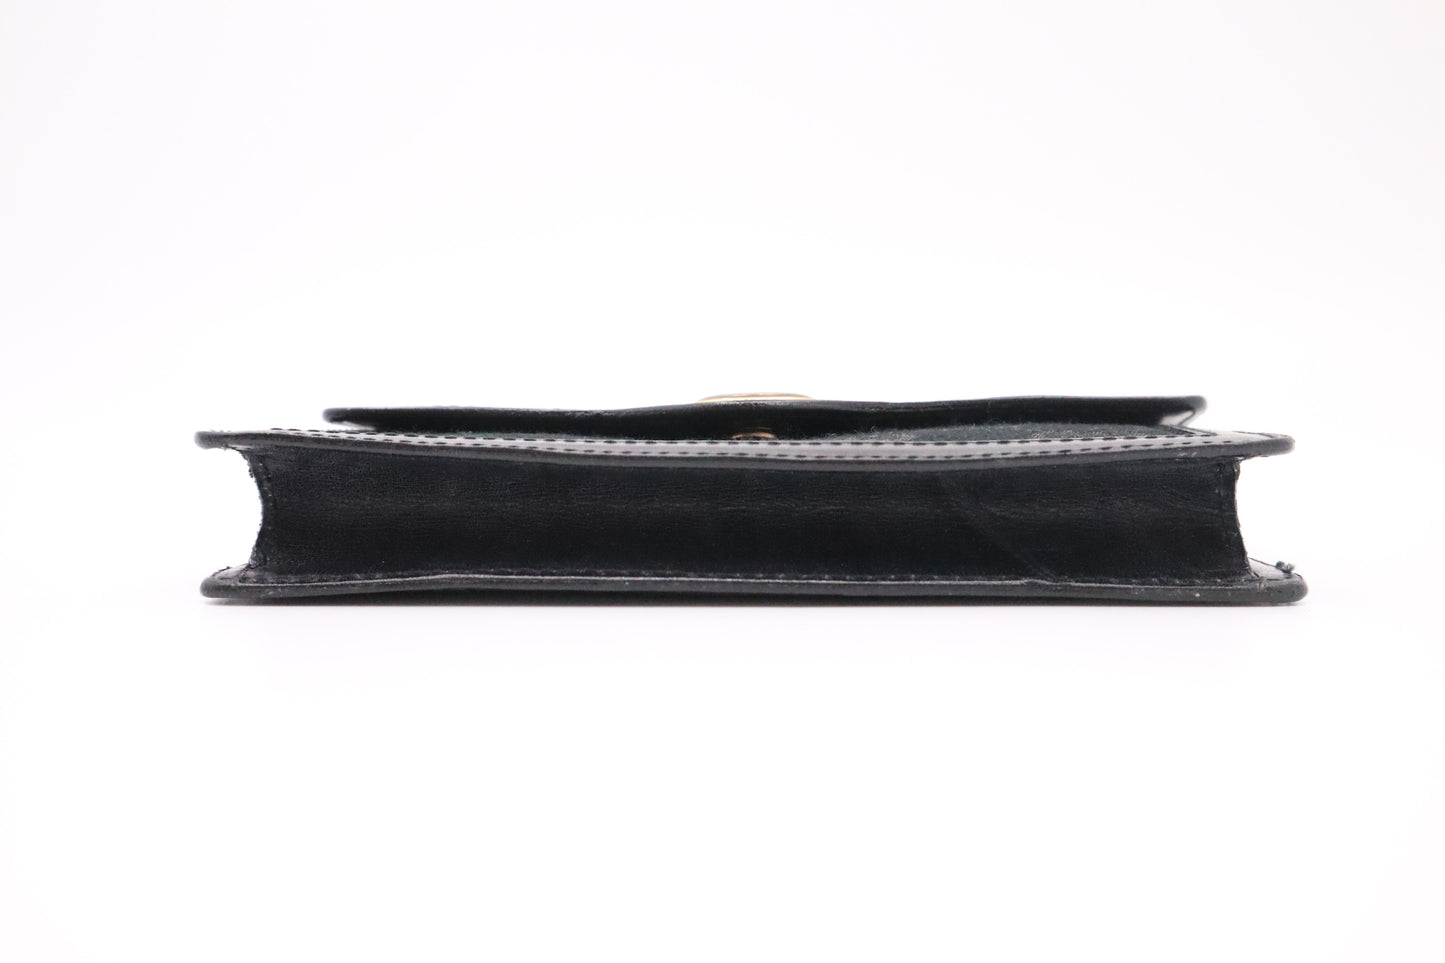 Gucci Compact Wallet in Black GG Canvas